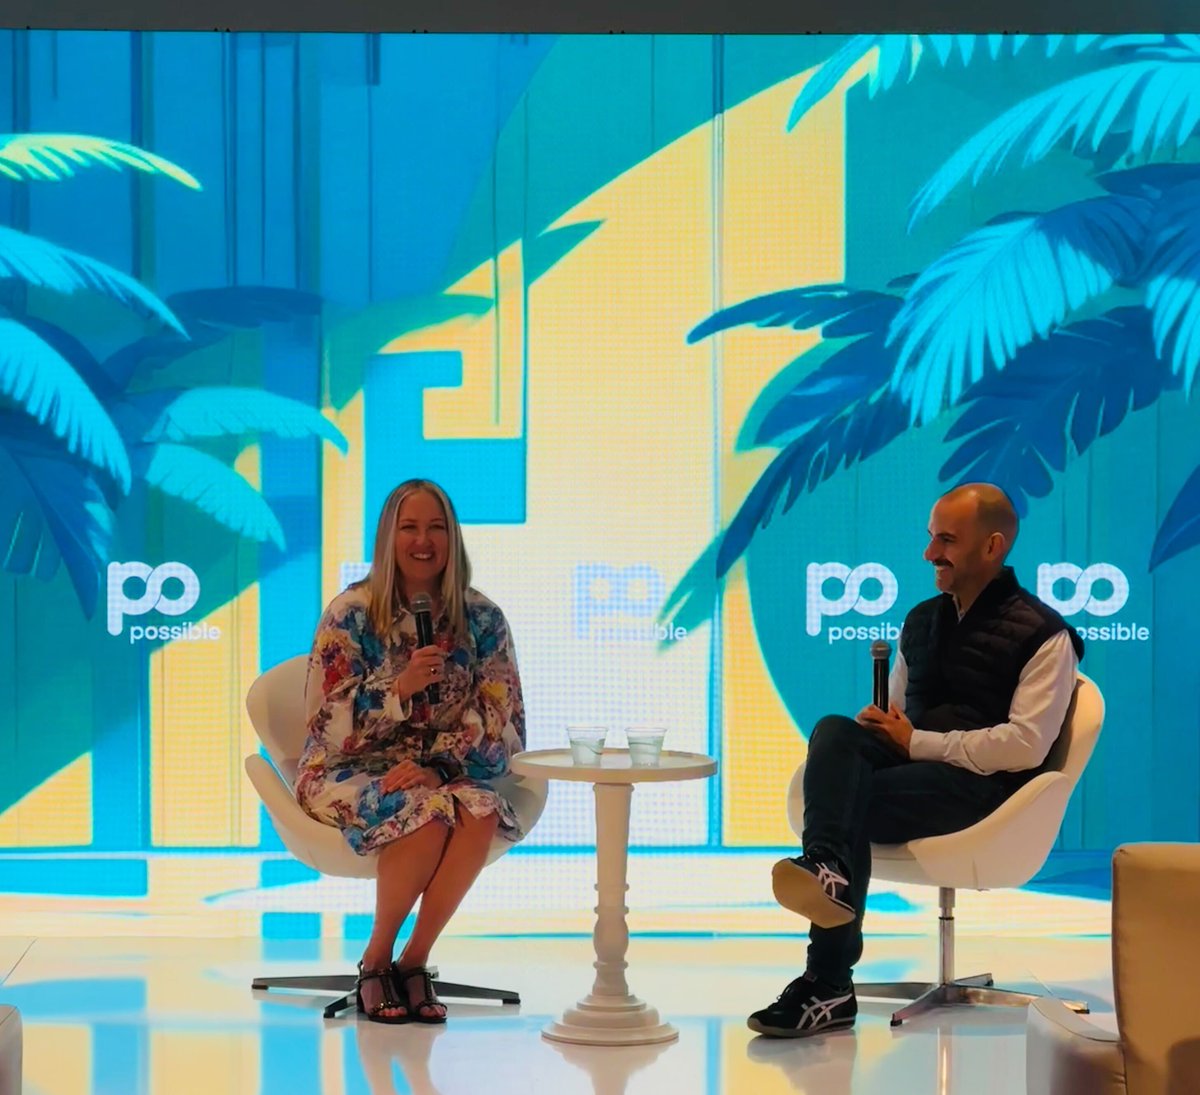 From POSSIBLE Miami today 🌴 @deborahwahl and @tasso shared the stage to discuss insights, advice and experience on how a boardroom perspective can revolutionize how CMOs lead. Thanks for joining us there!